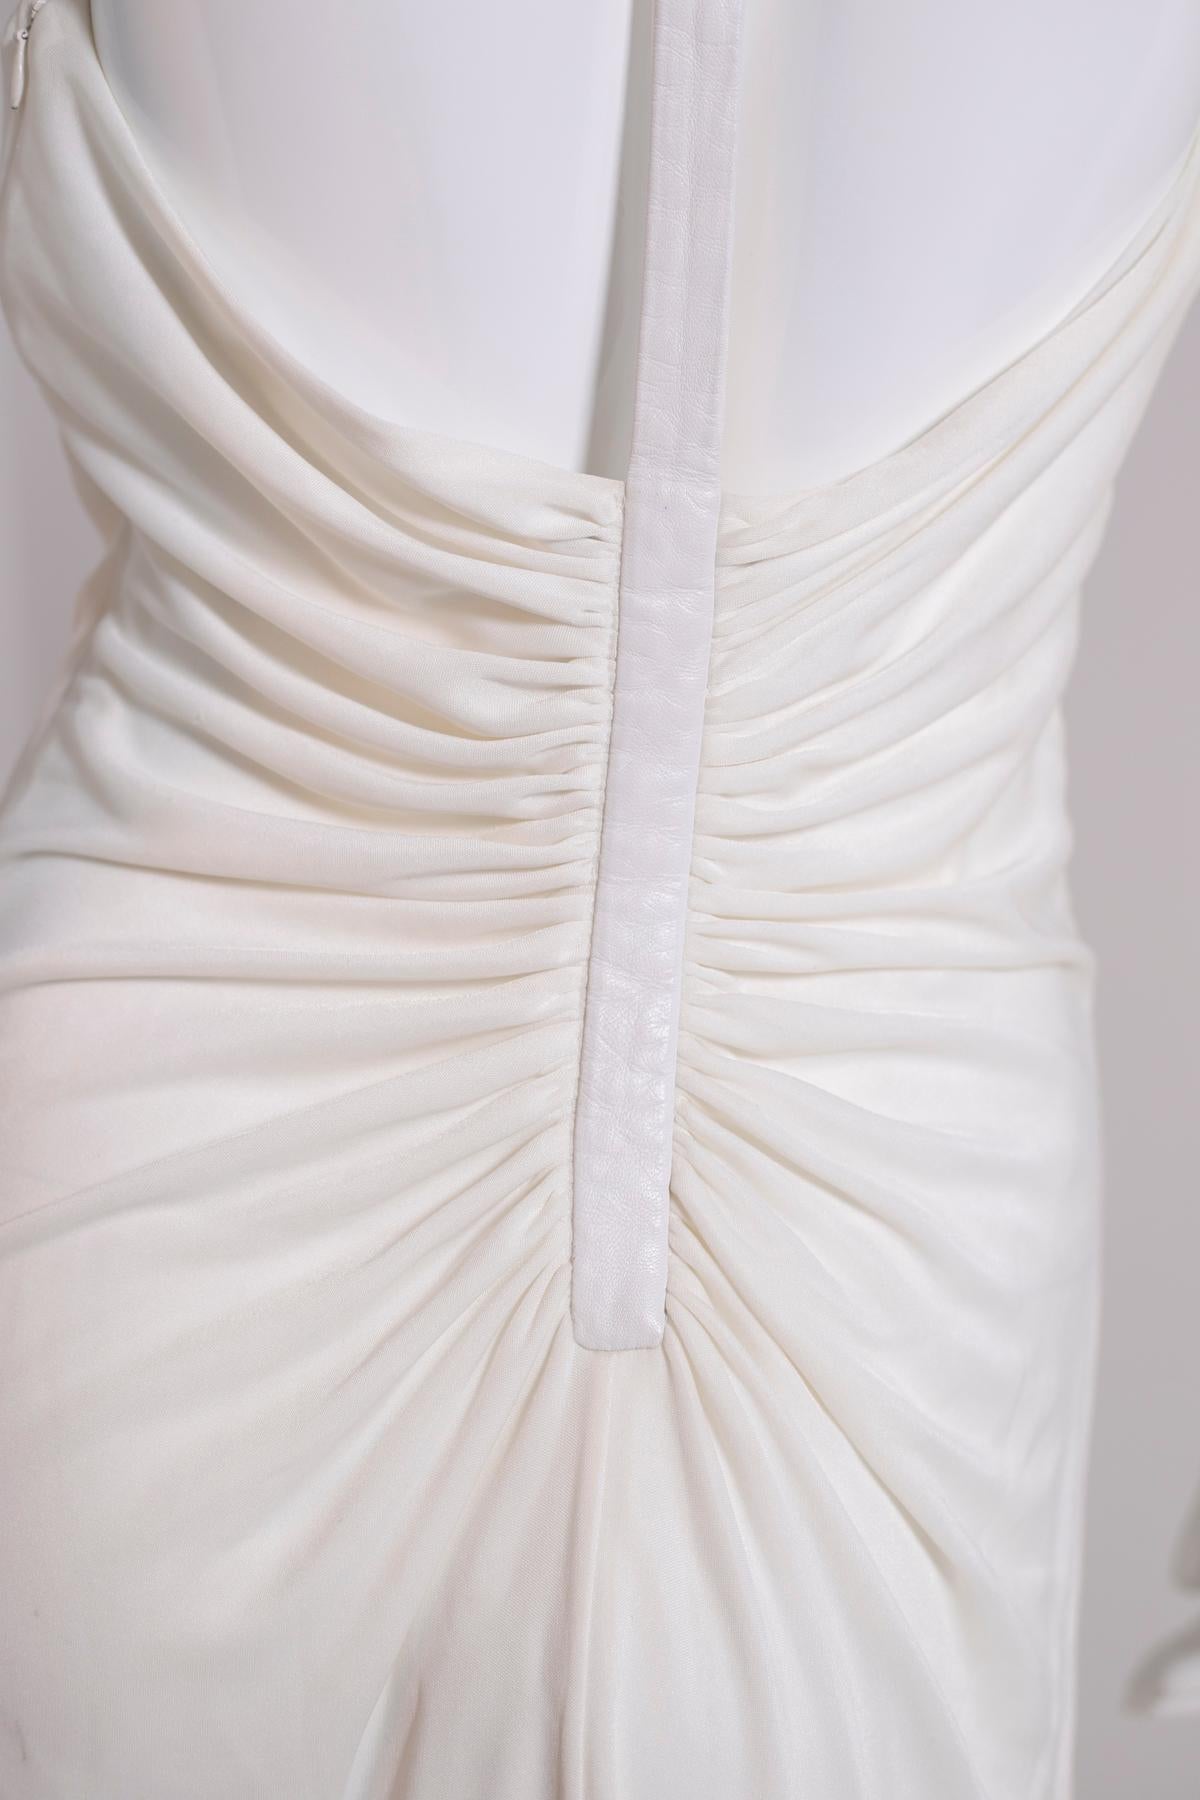 Gianni Versace White Chic Dress In Good Condition In Milano, IT